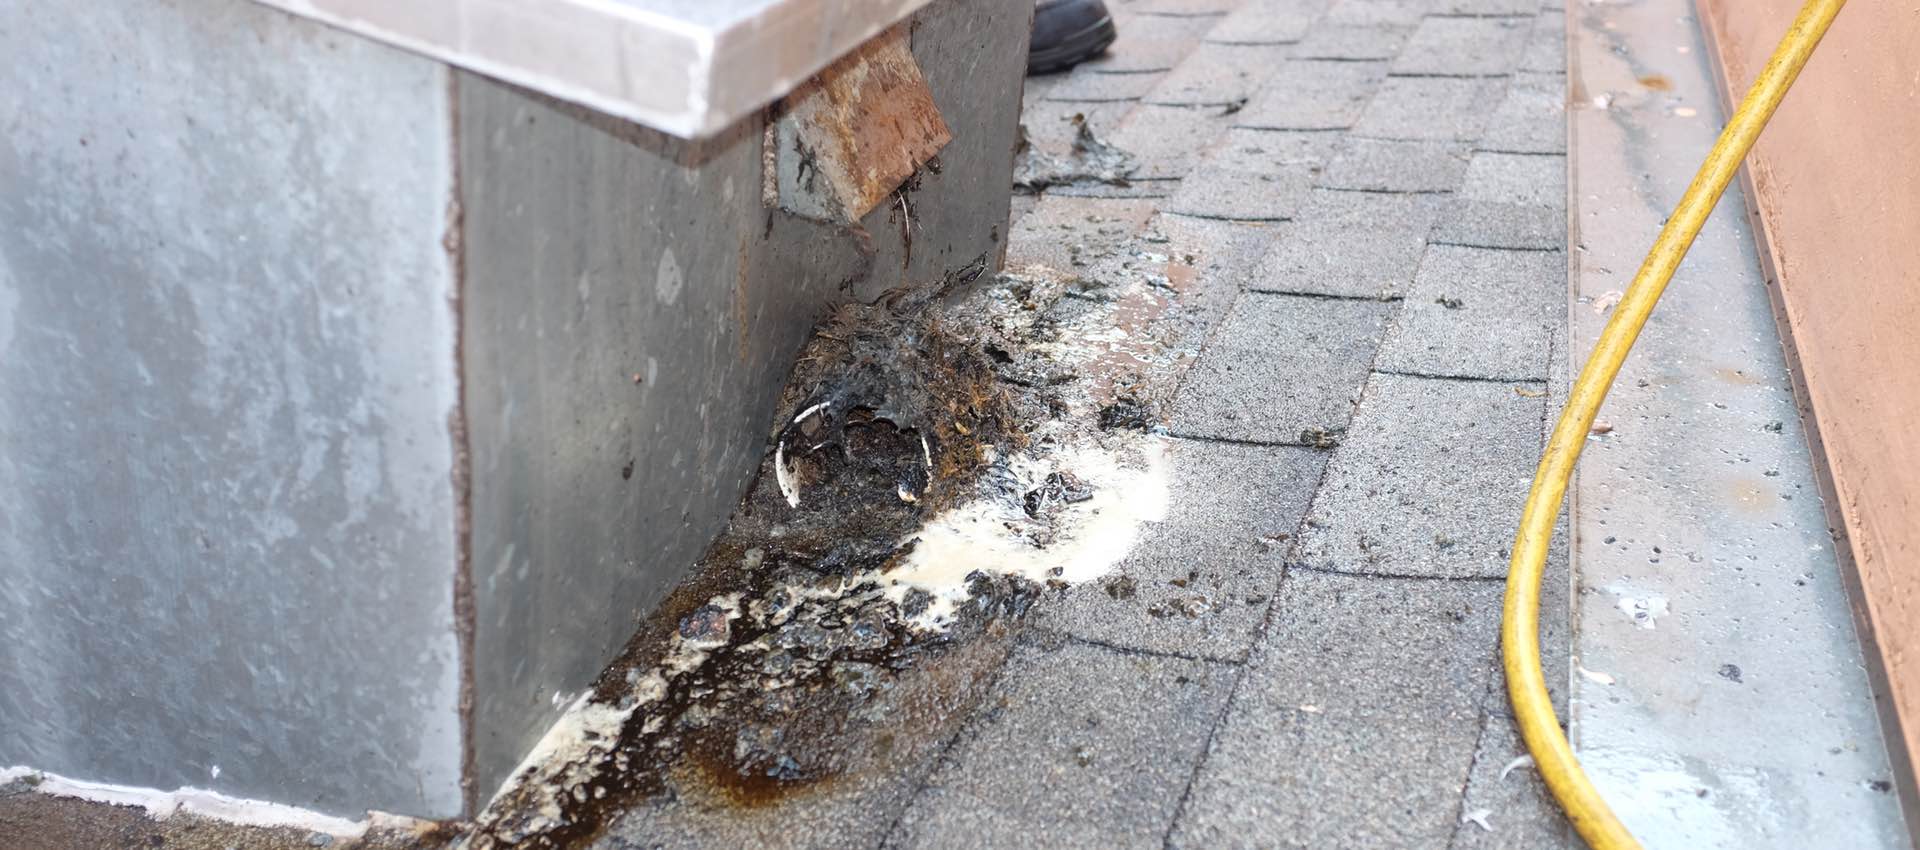 How to Clean Up a Rooftop Grease Spill